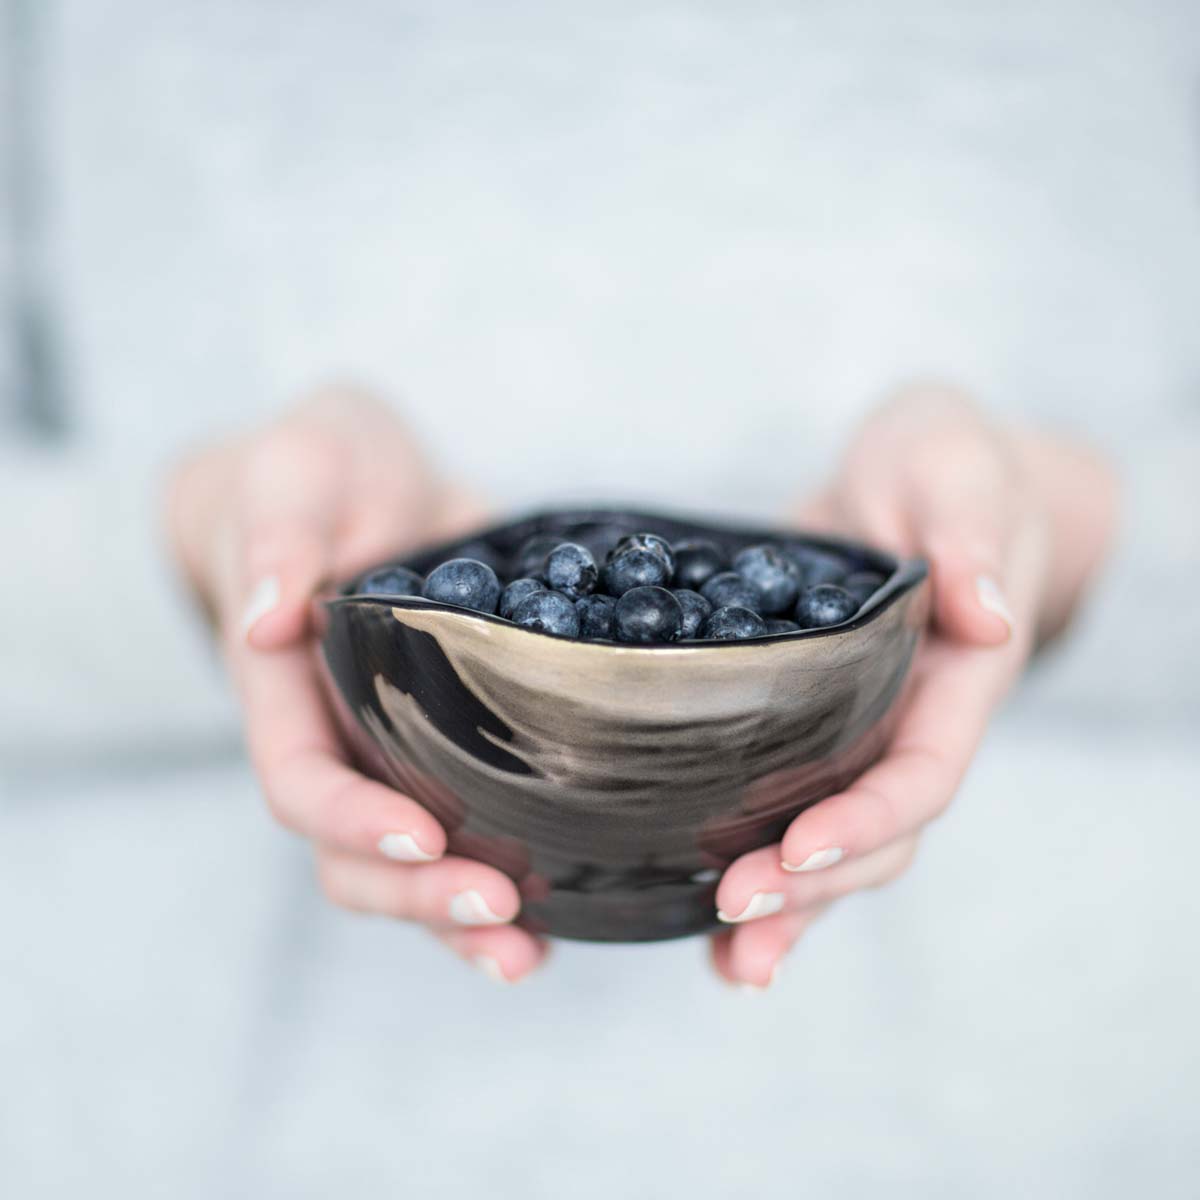 reese - annavasily handmade small blue bowl with gold highlights and blueberries offered by a woman.